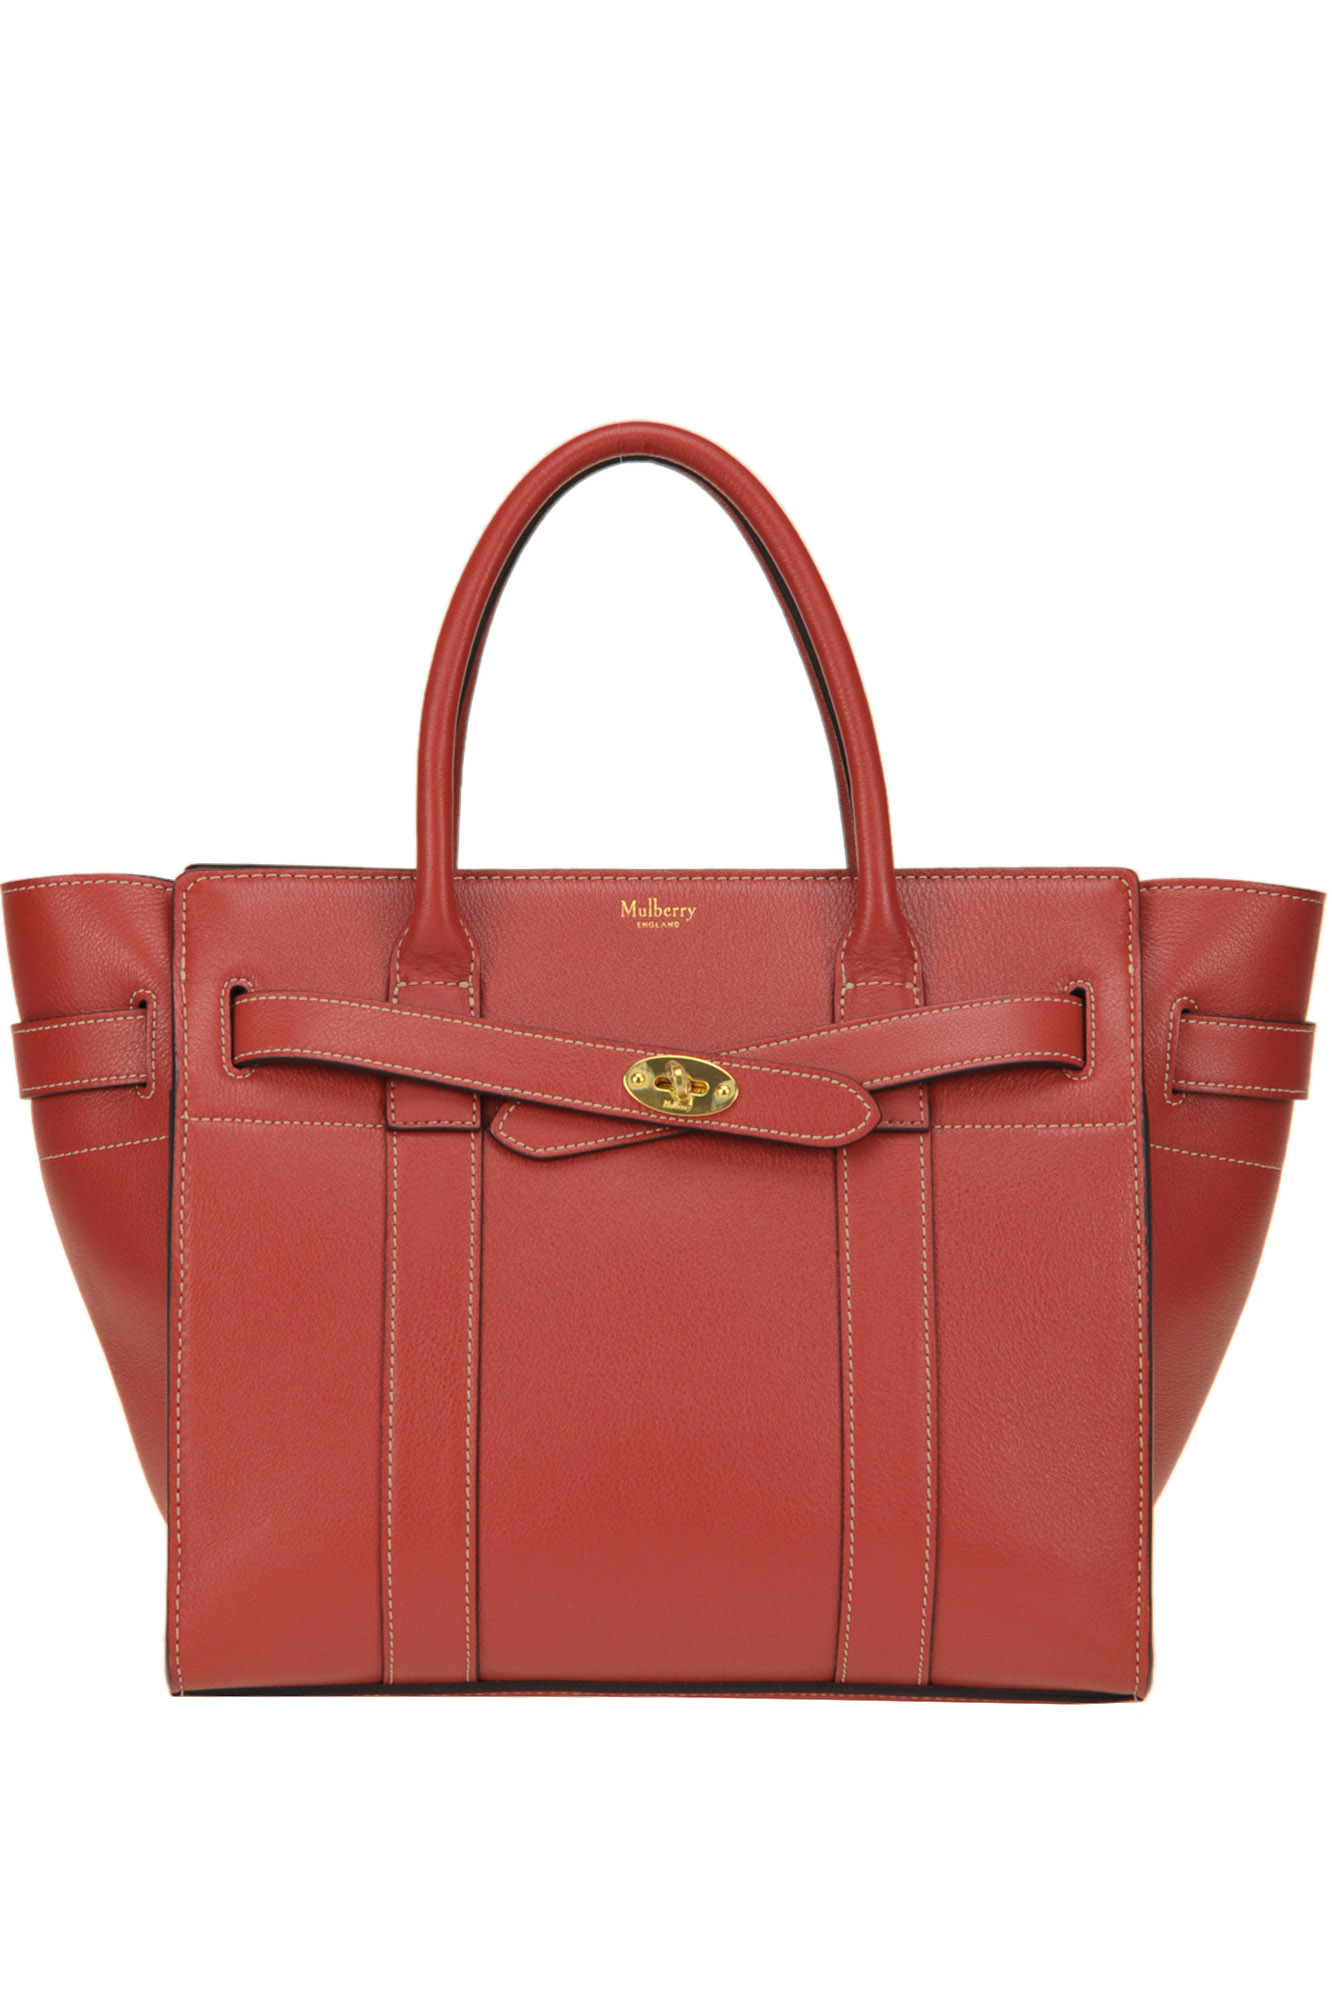 Mulberry Zipped Bayswater Leather Bag In Fire Red